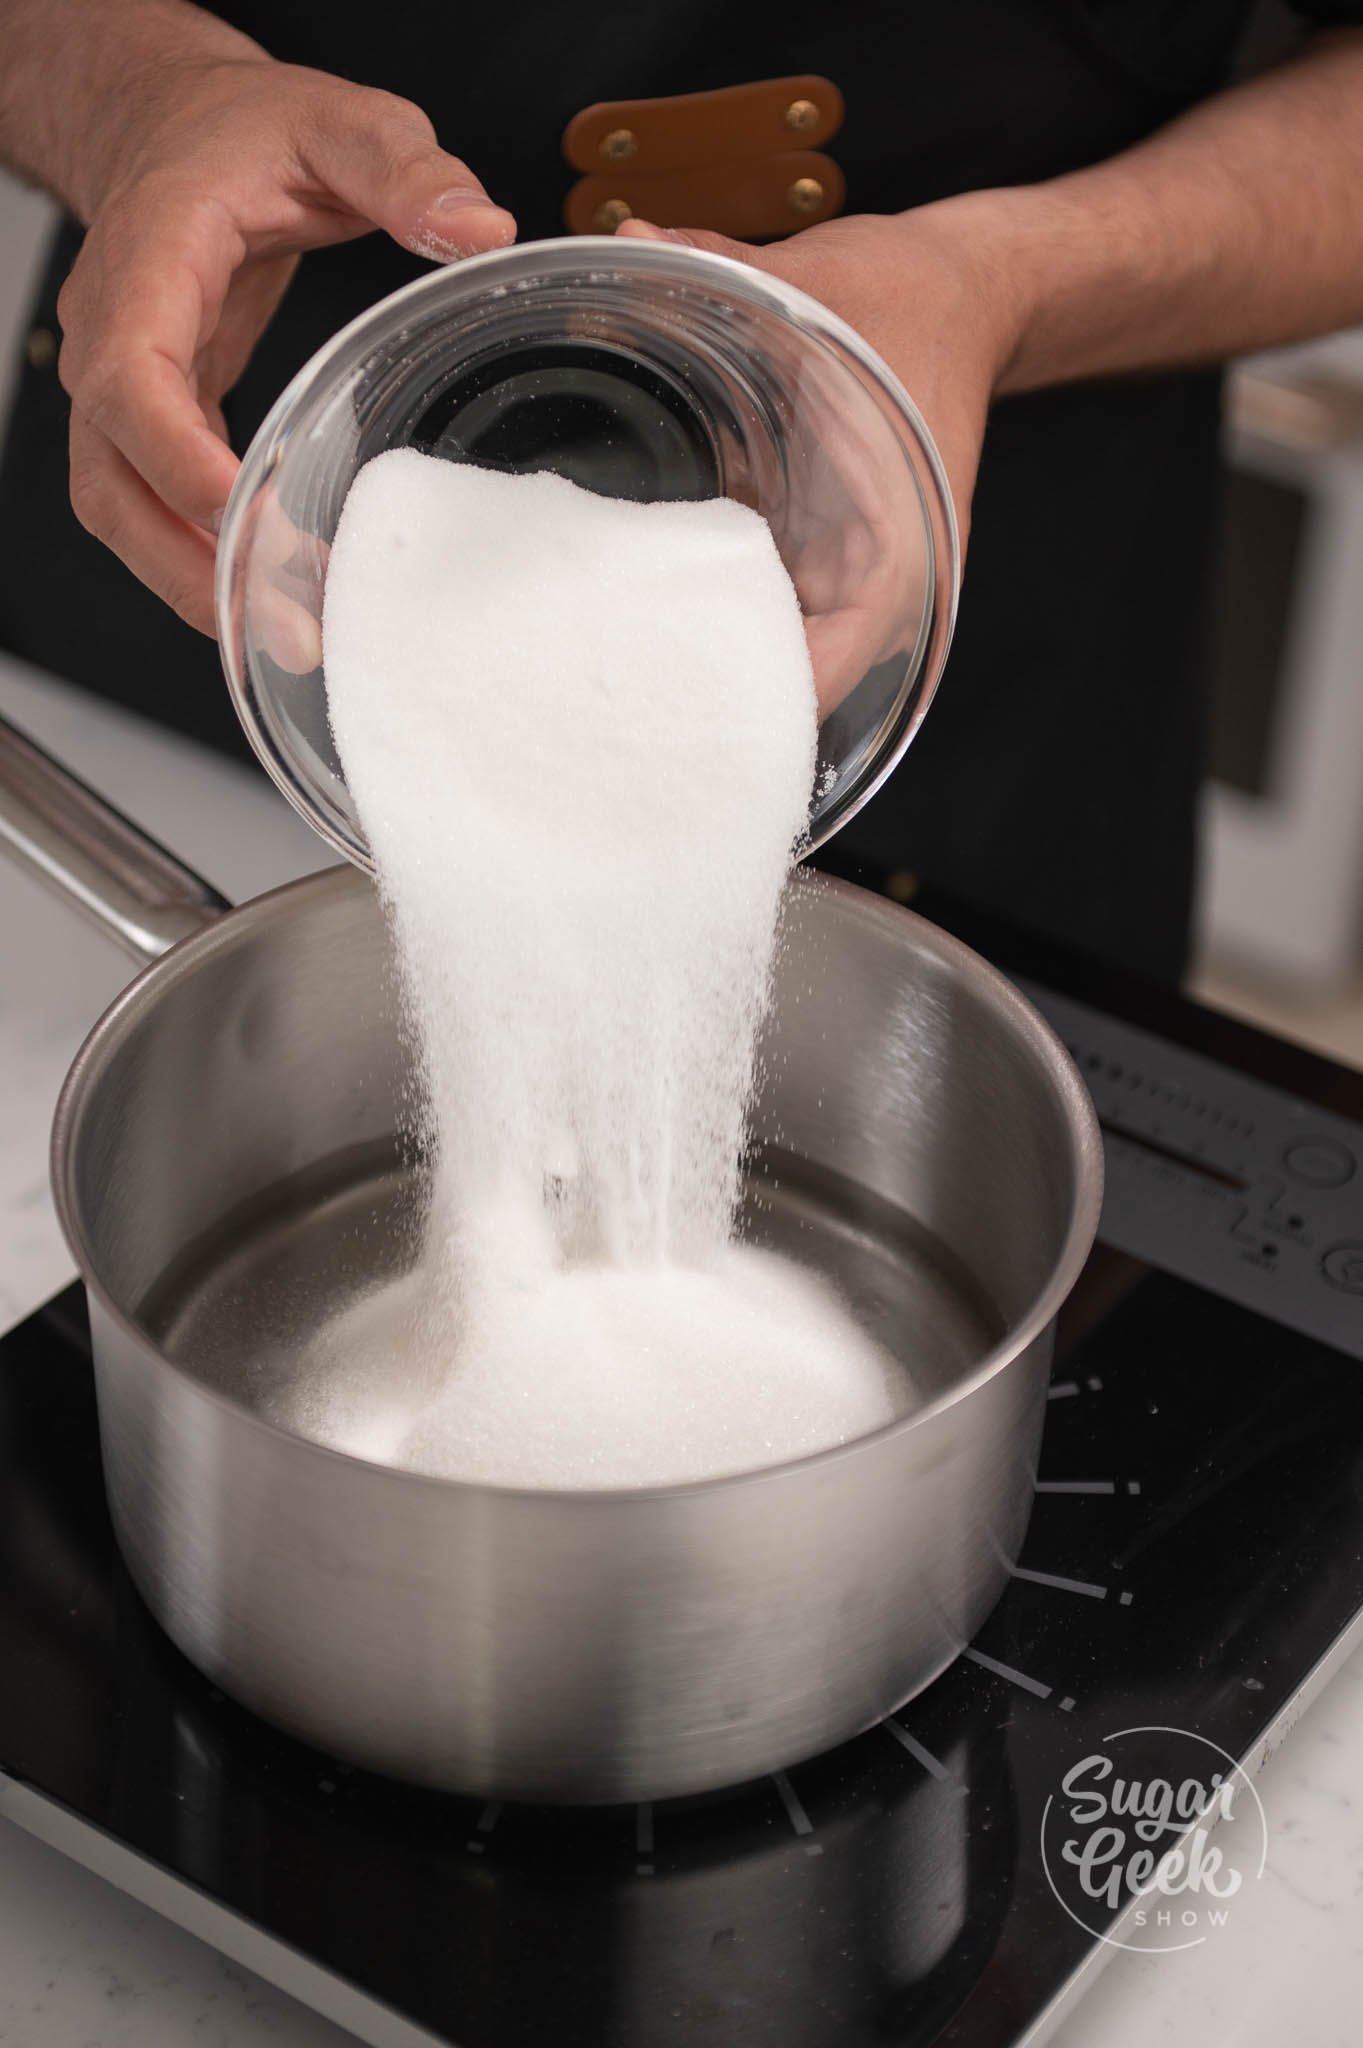 hand pouring container of sugar into pot.